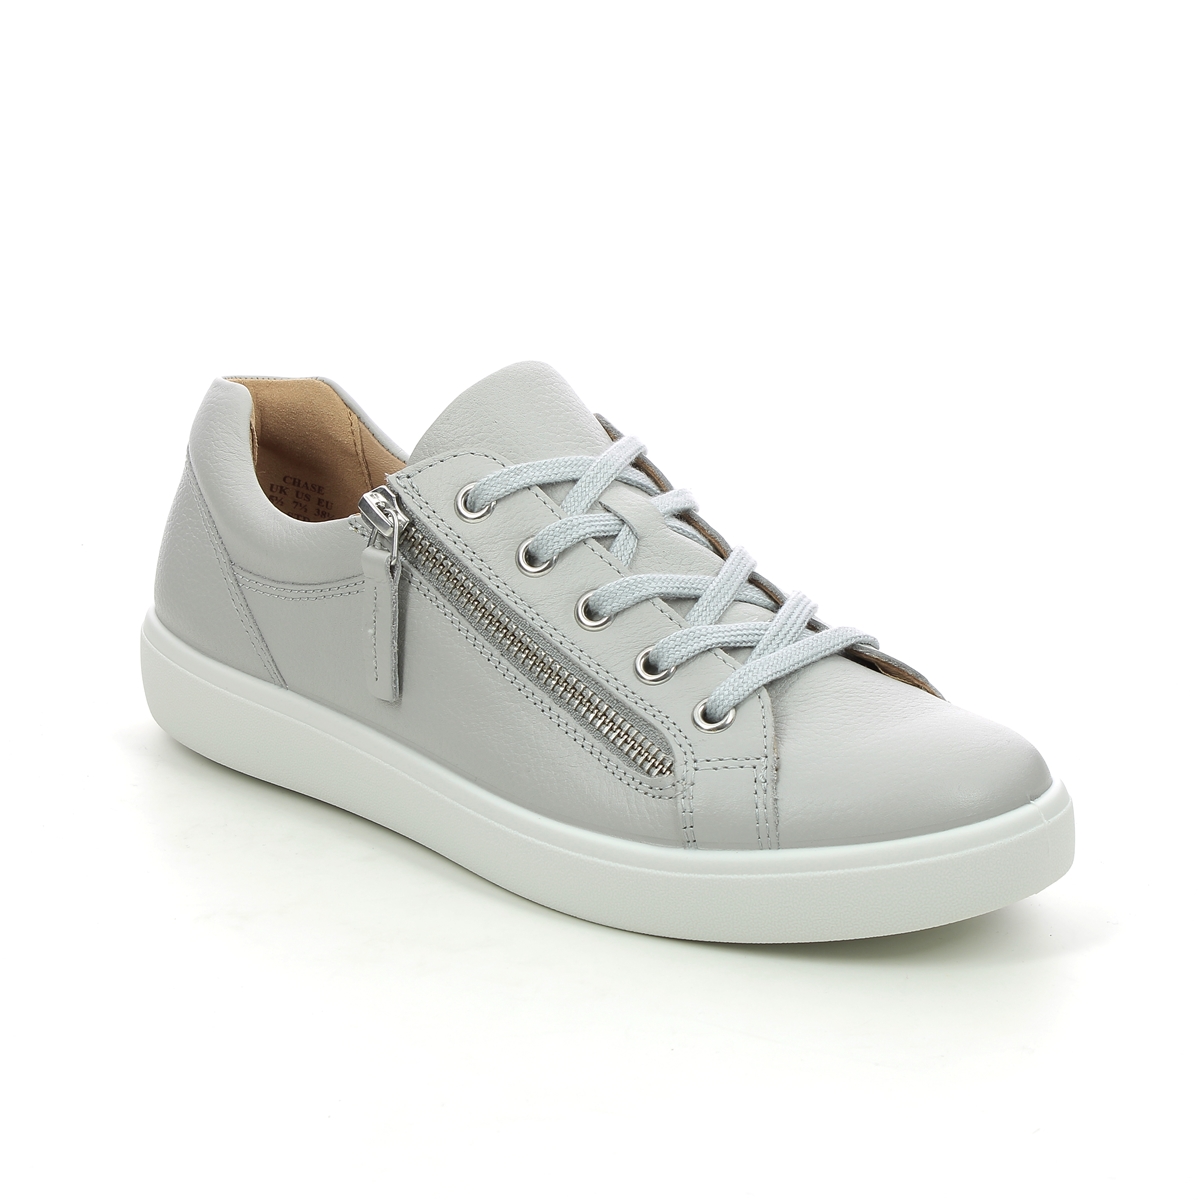 Hotter Chase Std 9908-10 Light Grey Leather trainers